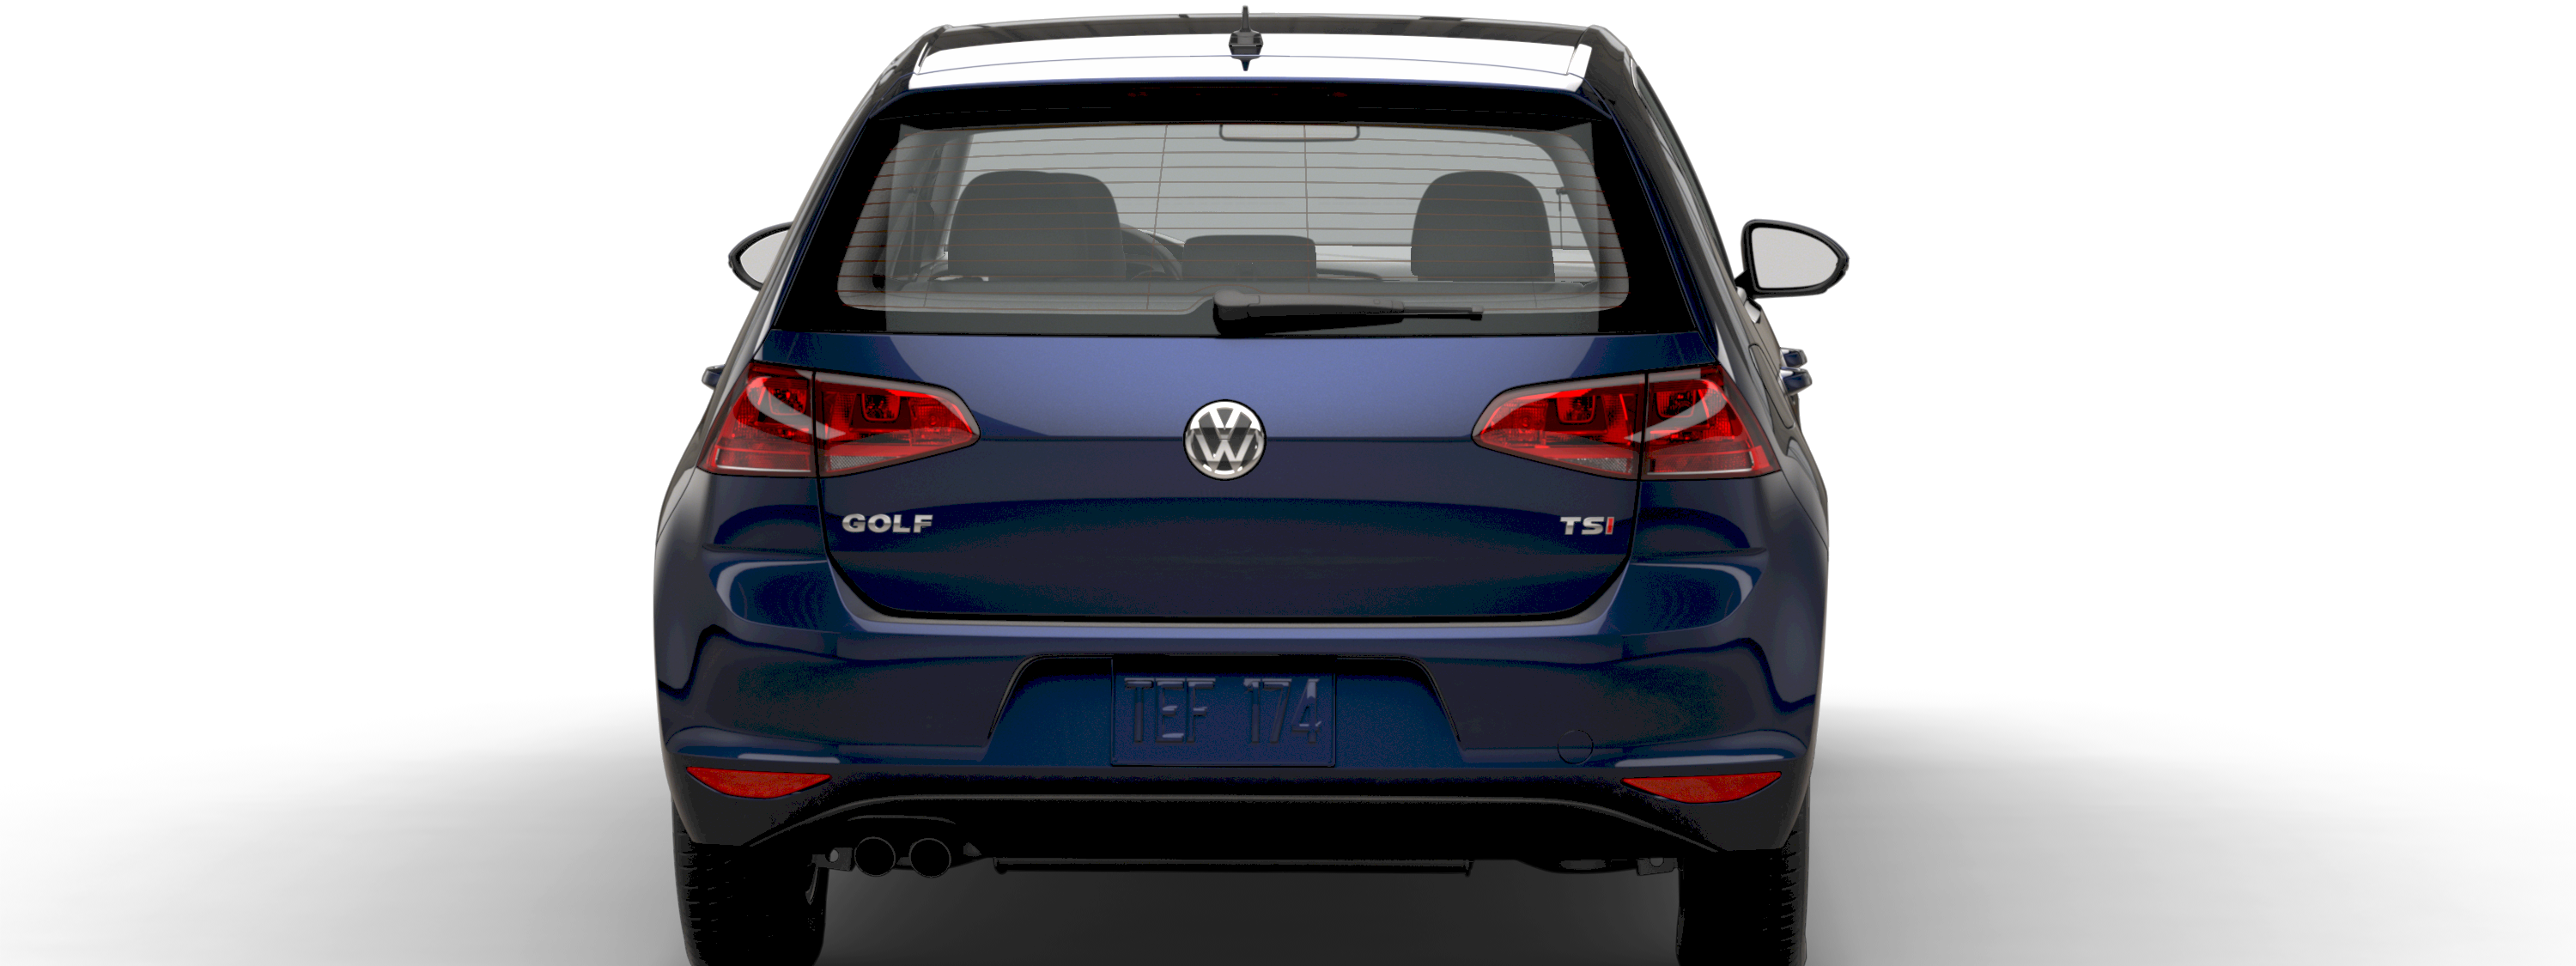 Volkswagen Golf S With Sunroof rear view